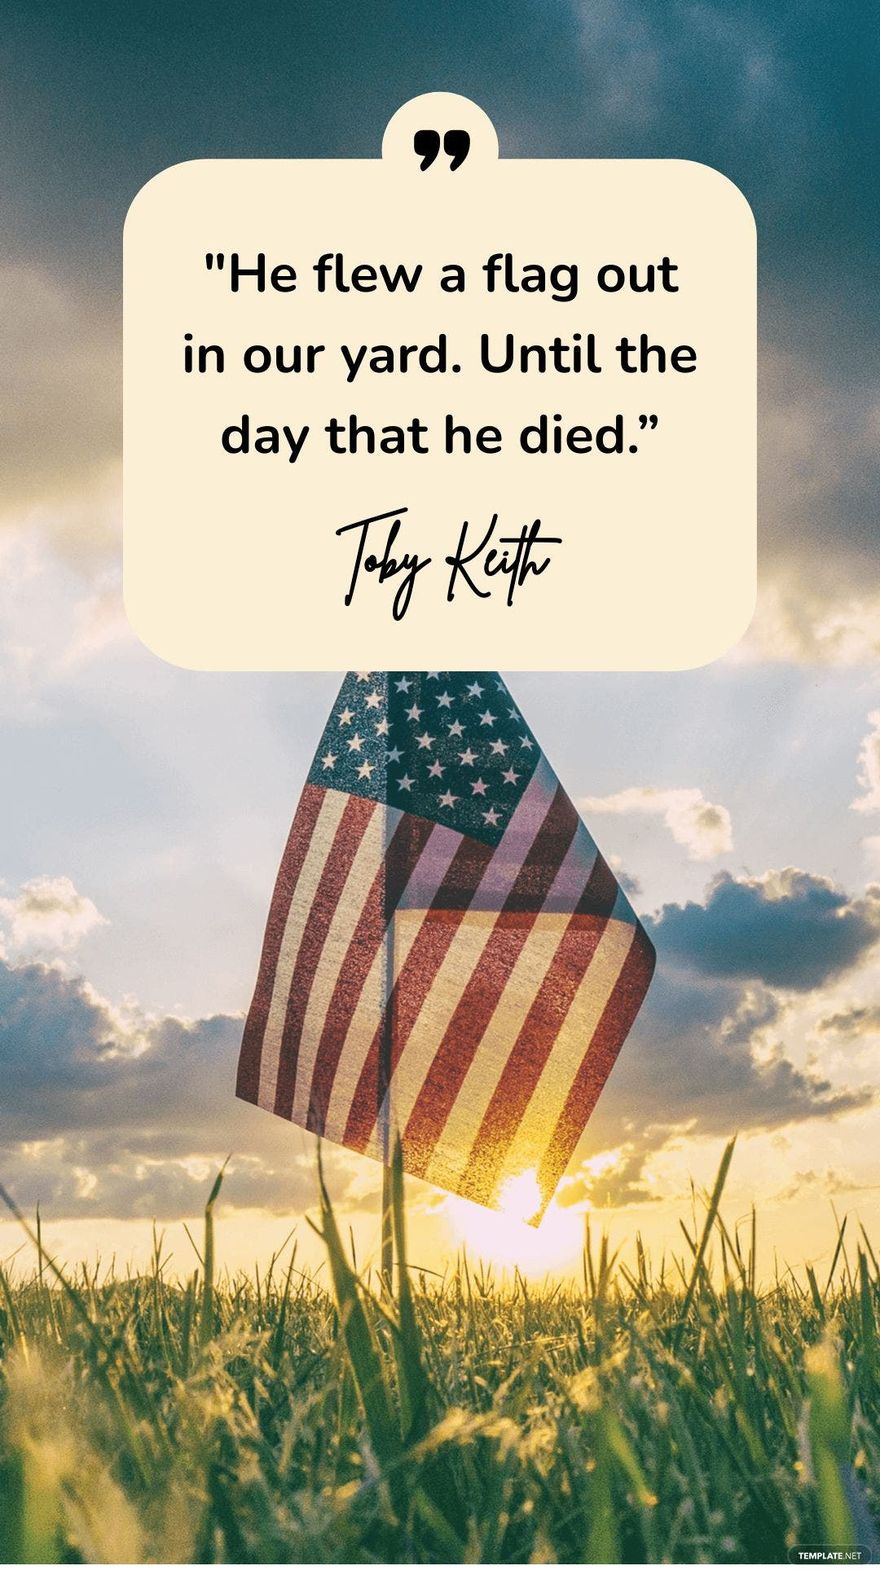 Toby Keith - "He flew a flag out in our yard. Until the day that he died.”